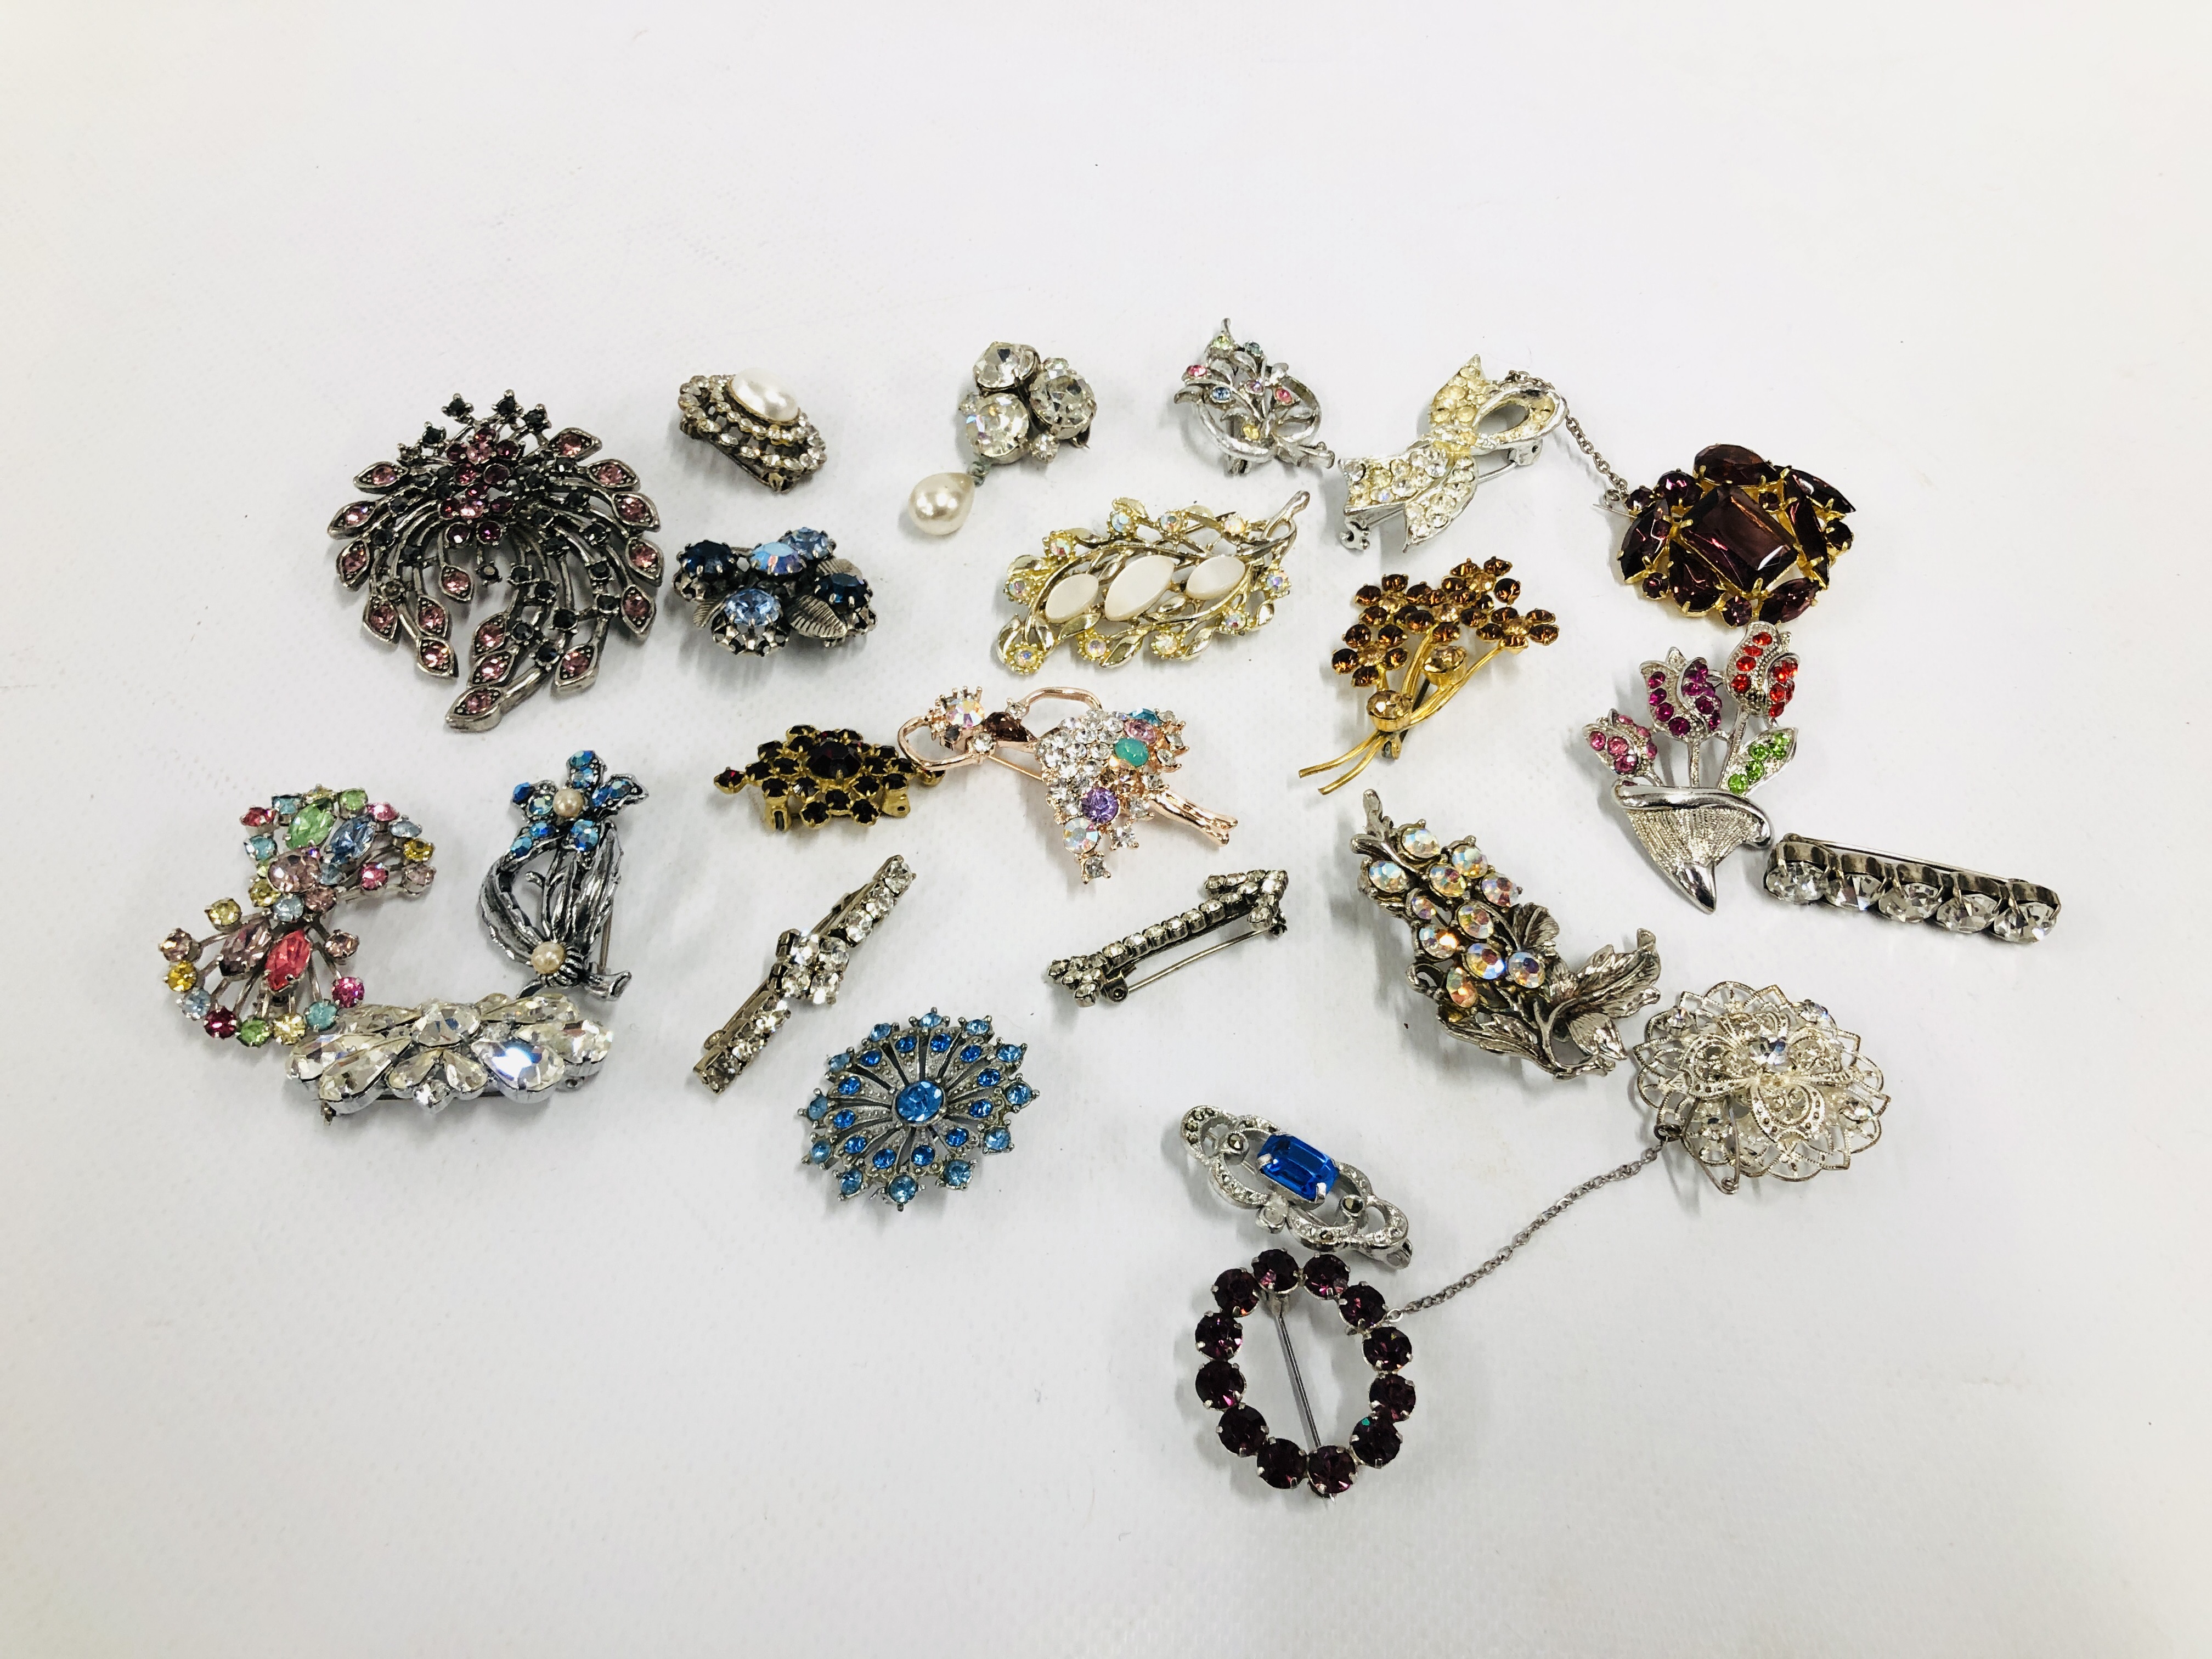 COLLECTION OF 23 VINTAGE AND RETRO SILVER AND GOLD TONE BROOCHES.